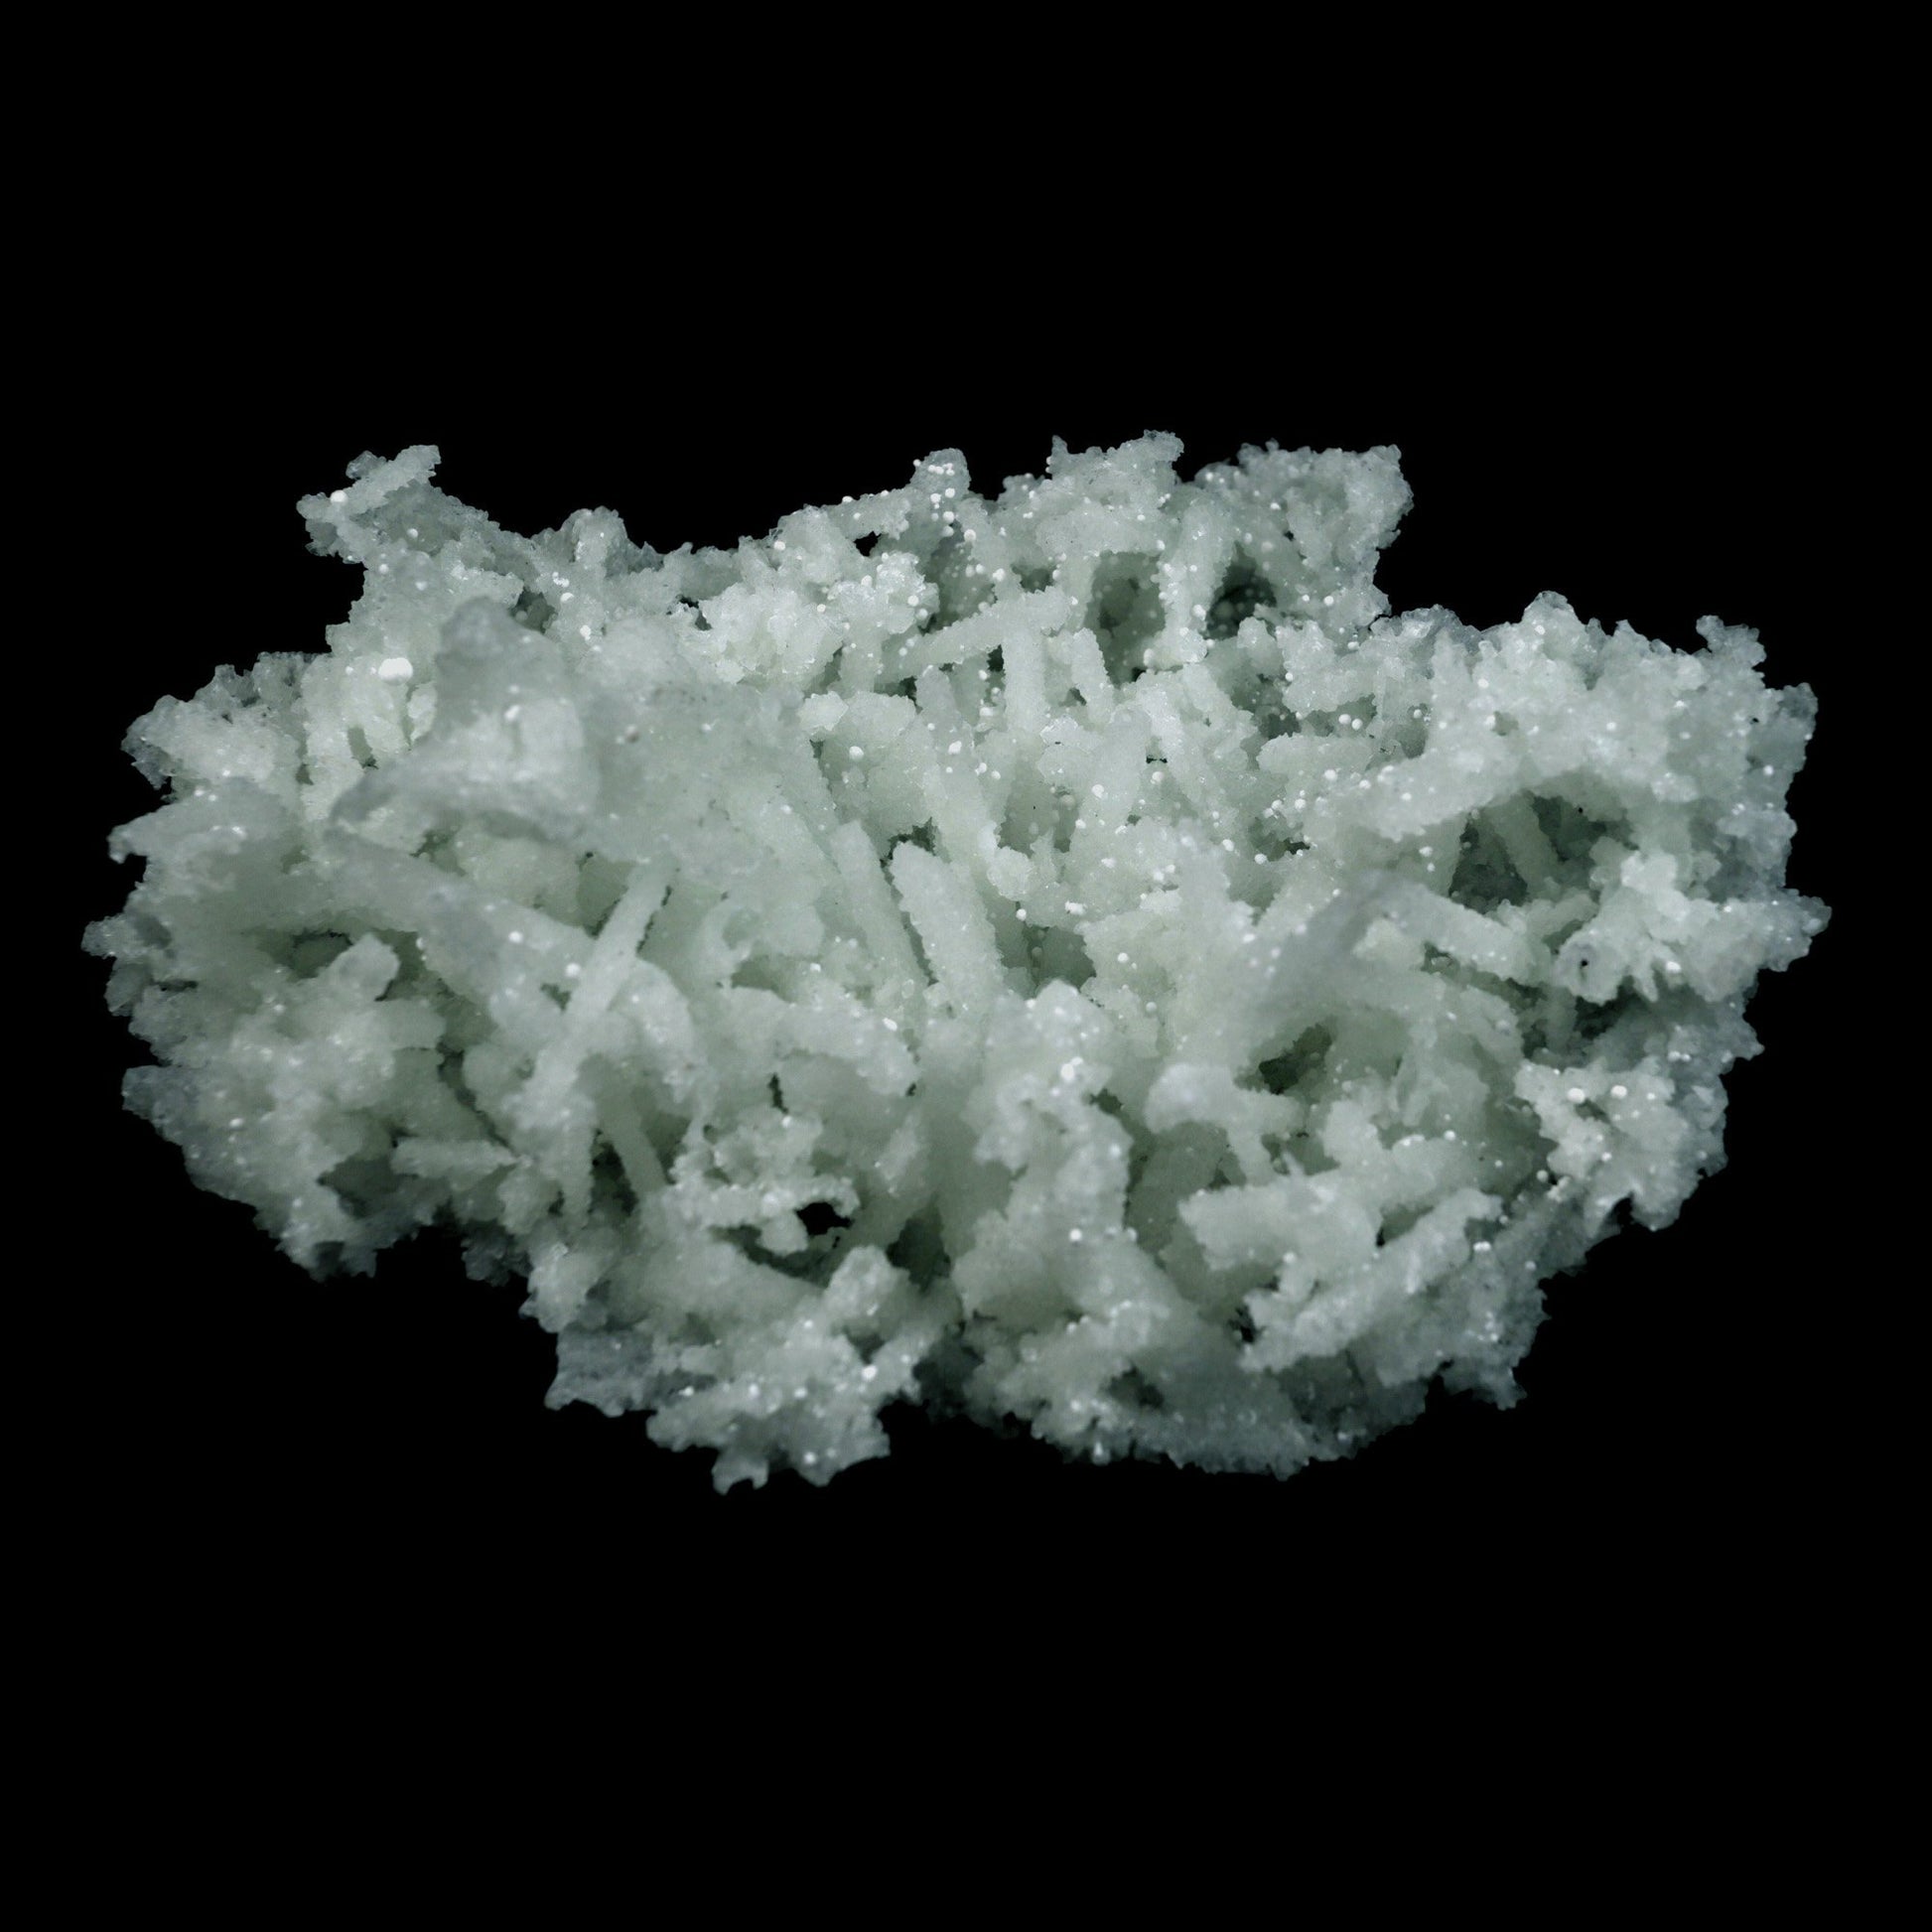 Prehnite Rare Find Natural Mineral Specimen # B 4755  https://www.superbminerals.us/products/prehnite-rare-find-natural-mineral-specimen-b-4755  Features: A coveted jackstraw cluster of elongated laumontite crystals that pseudomorphed from mint-green, translucent prehnite crystals has been discovered in the United Kingdom.The Malad Quarry, located near Mumbai, is a well-known source of classic and excellent vintage material for restoration projects.